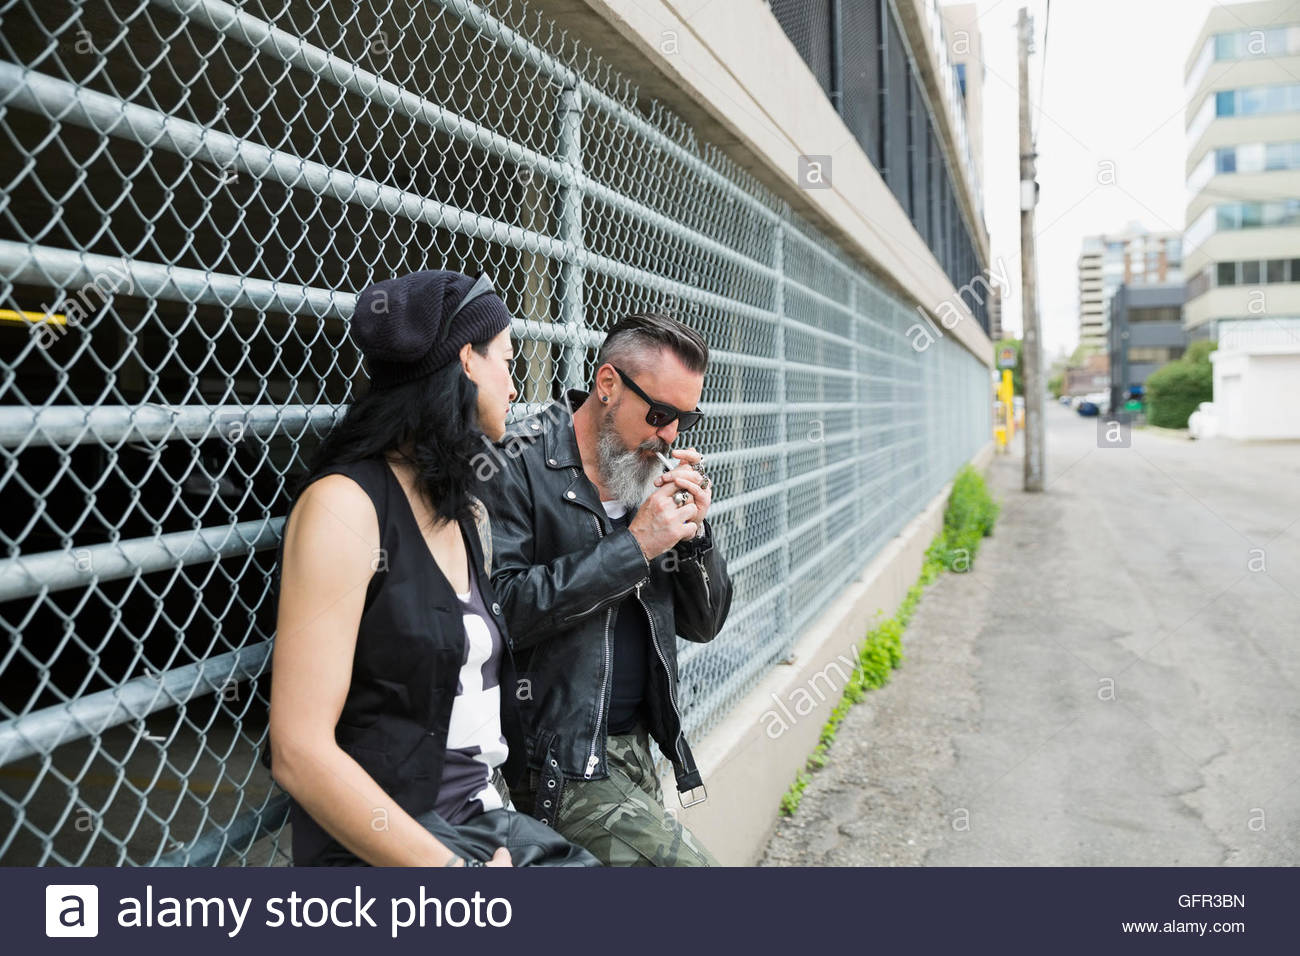 Cool mature couple smoking cigarette at urban fence Stock Photo